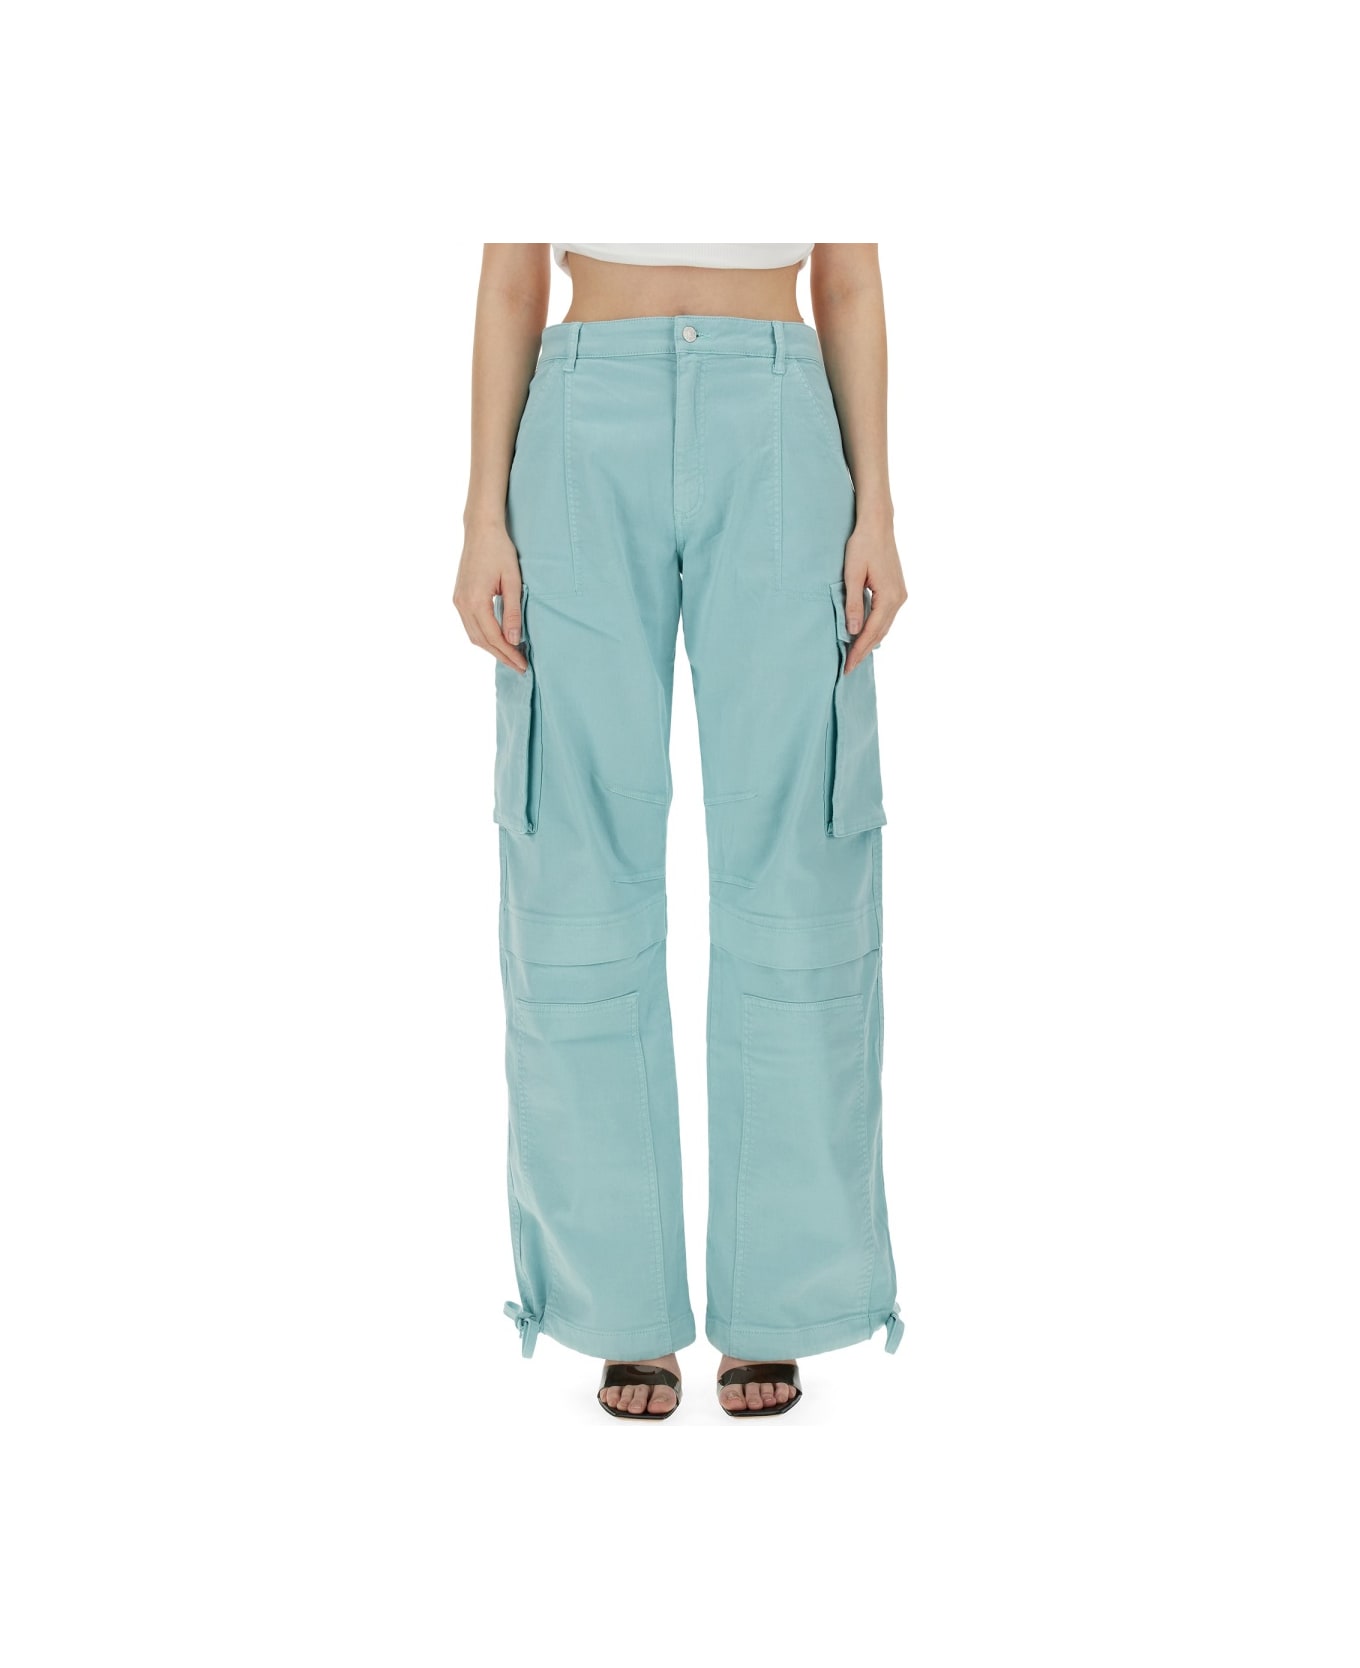 M05CH1N0 Jeans Cargo Pants - BABY BLUE